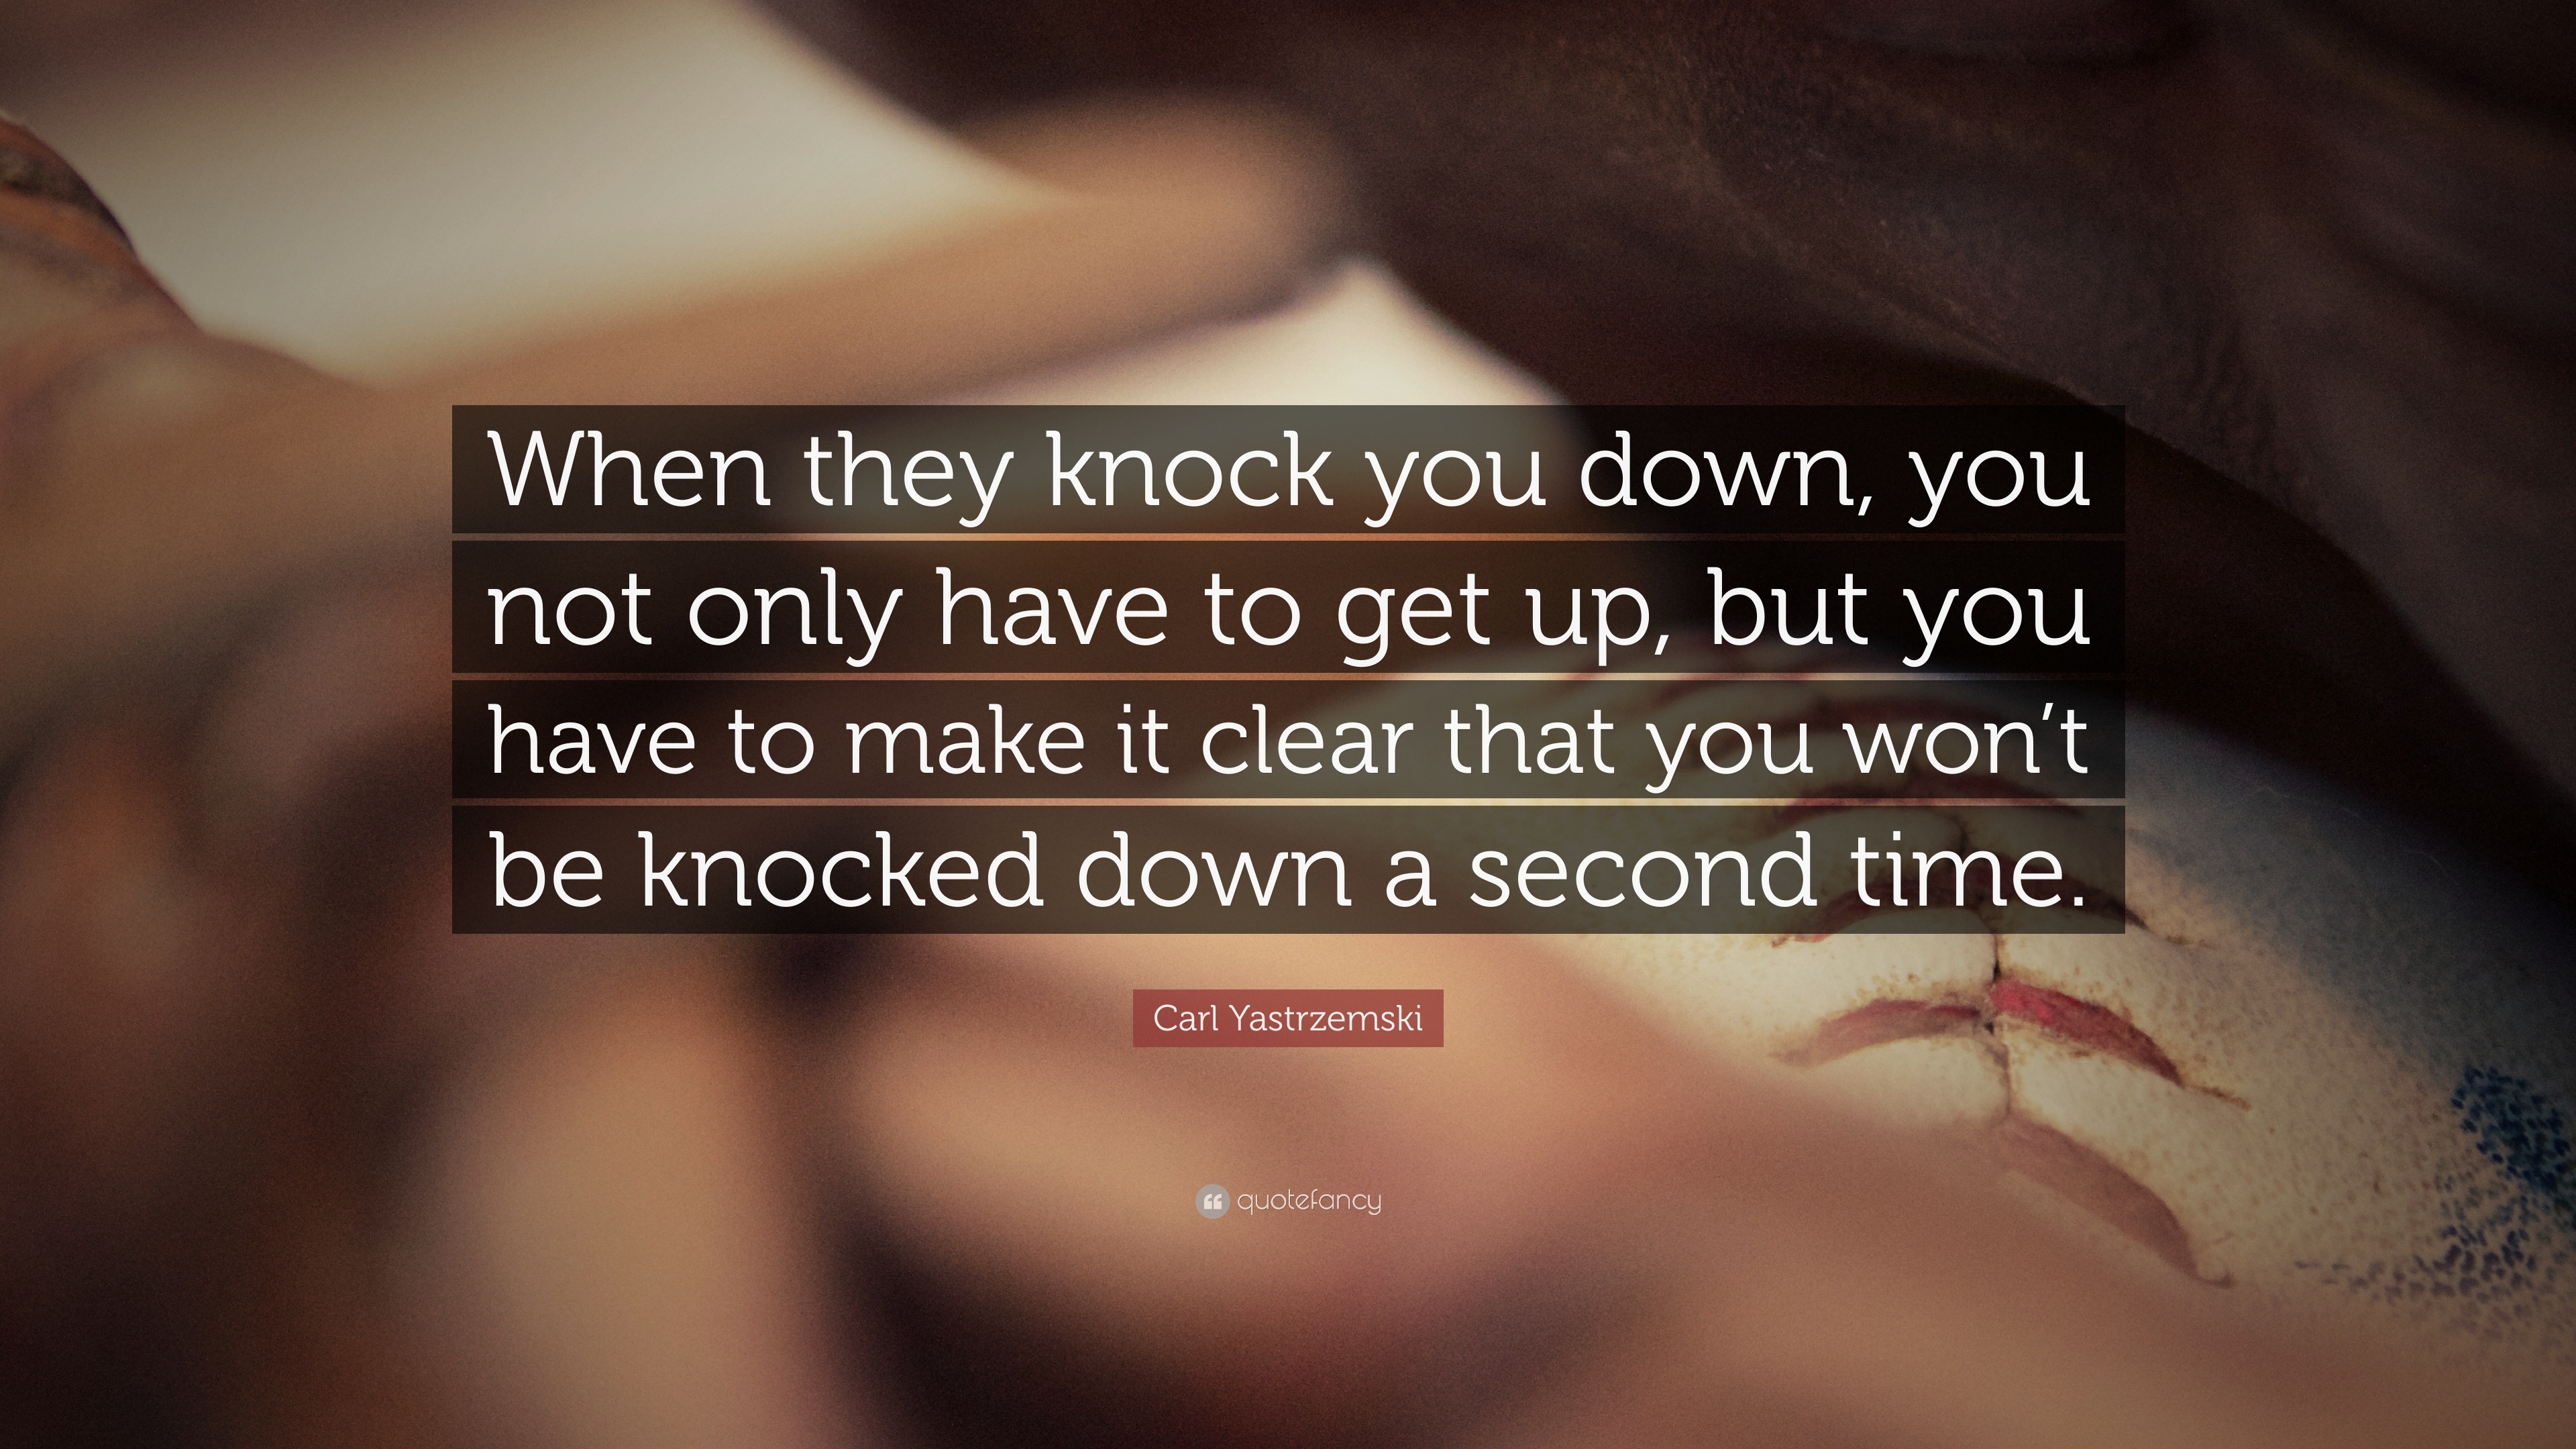 When they knock you down, you not only have to get up, but you have to make it clear that...